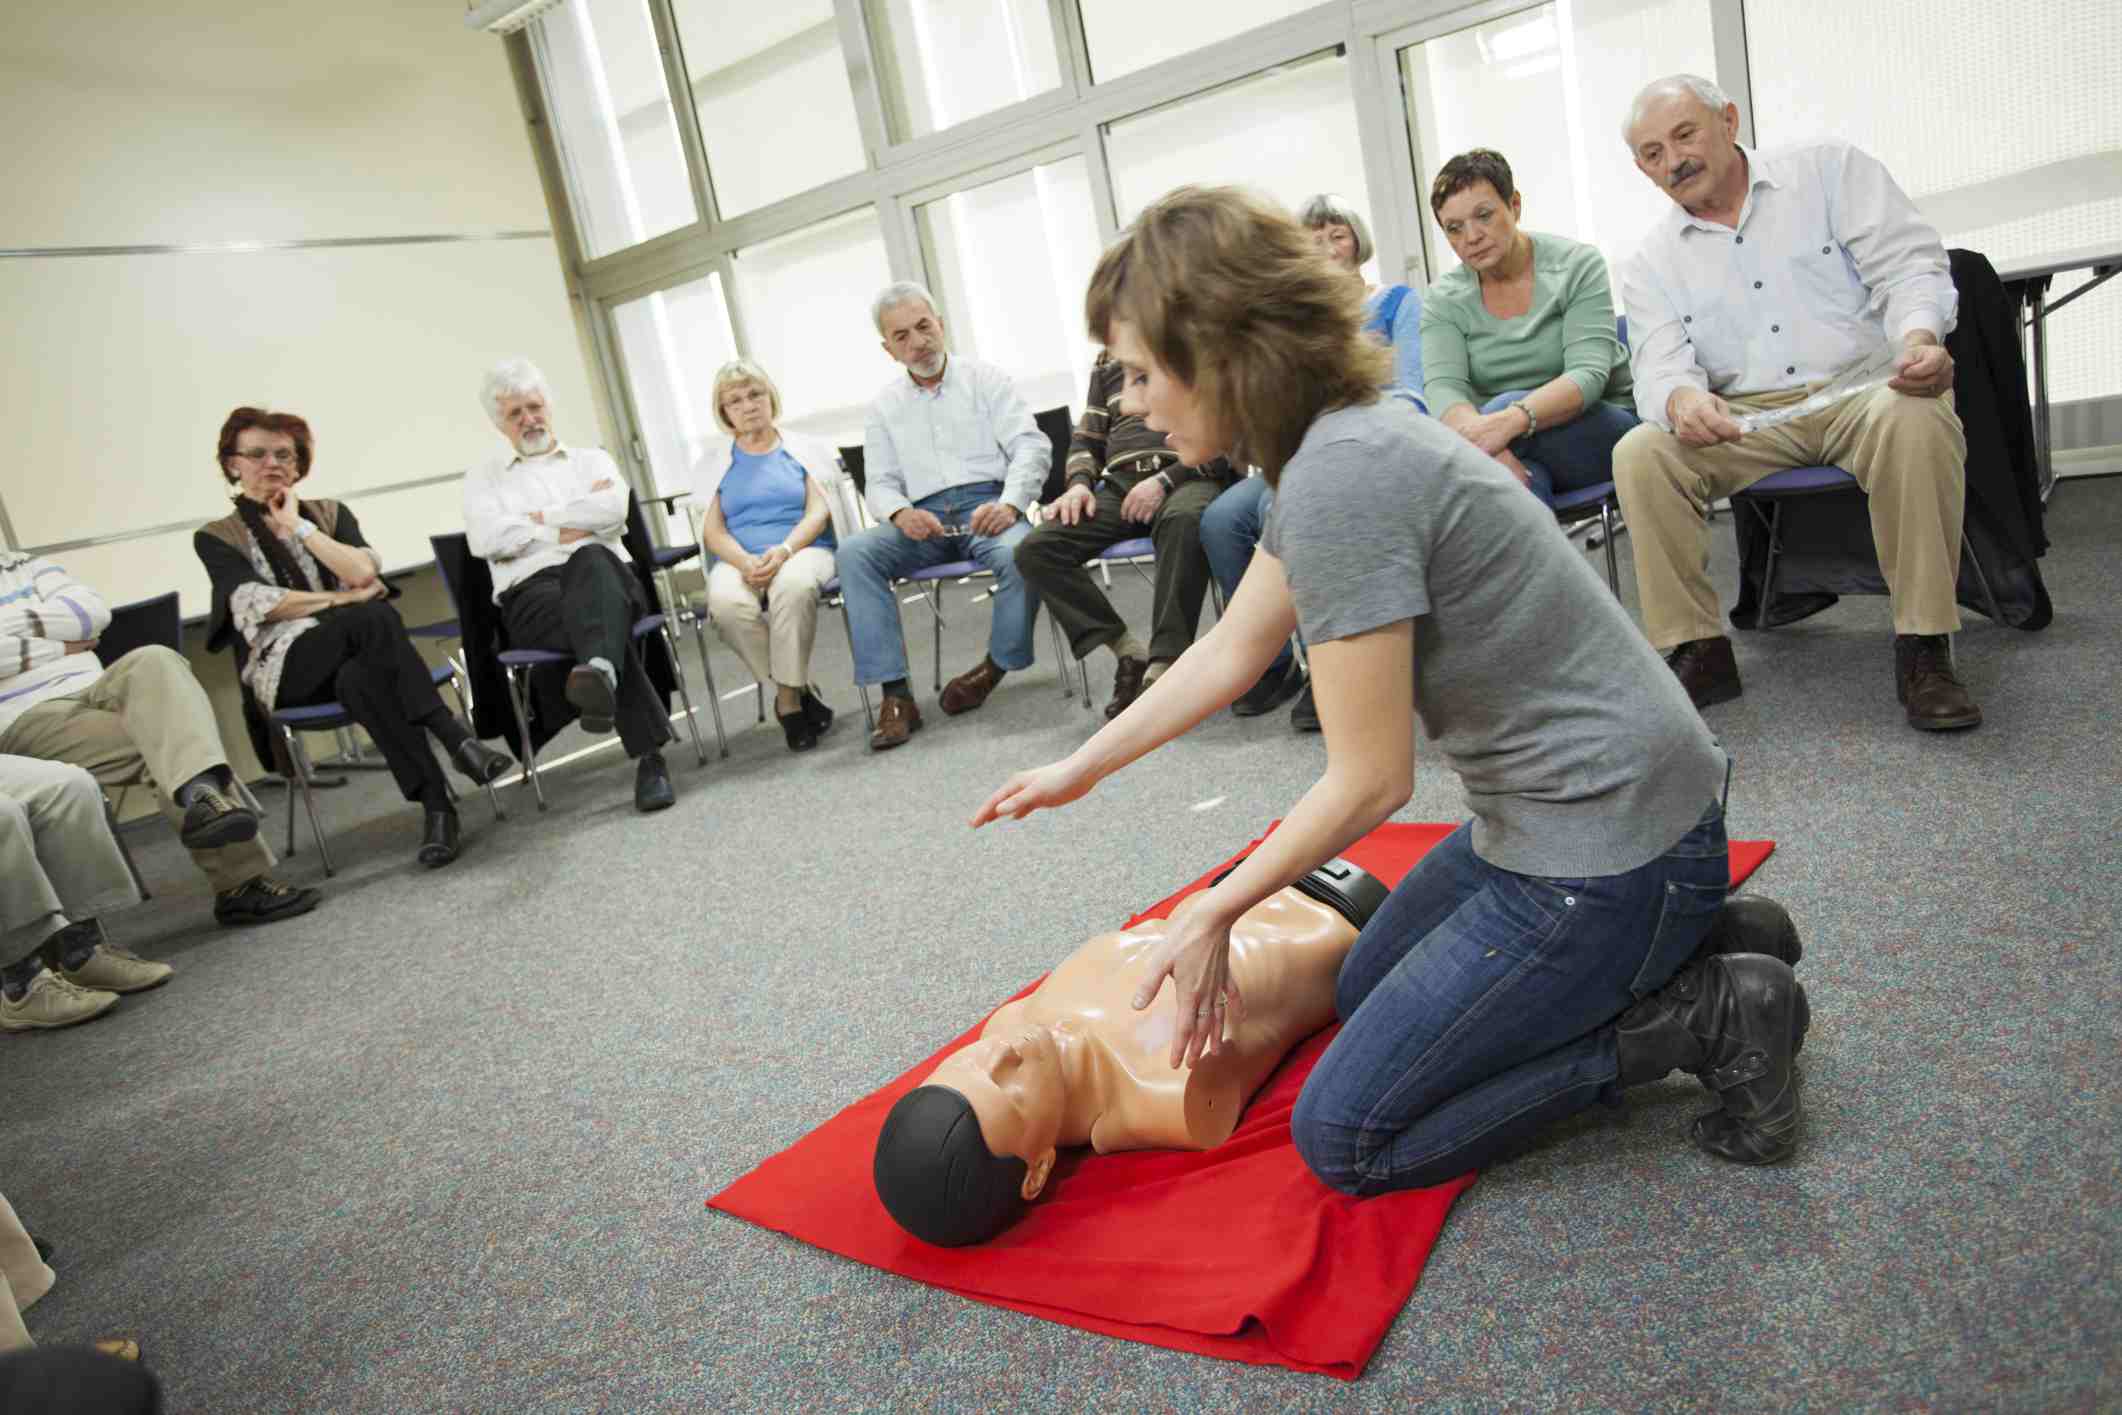 cpr on a real person